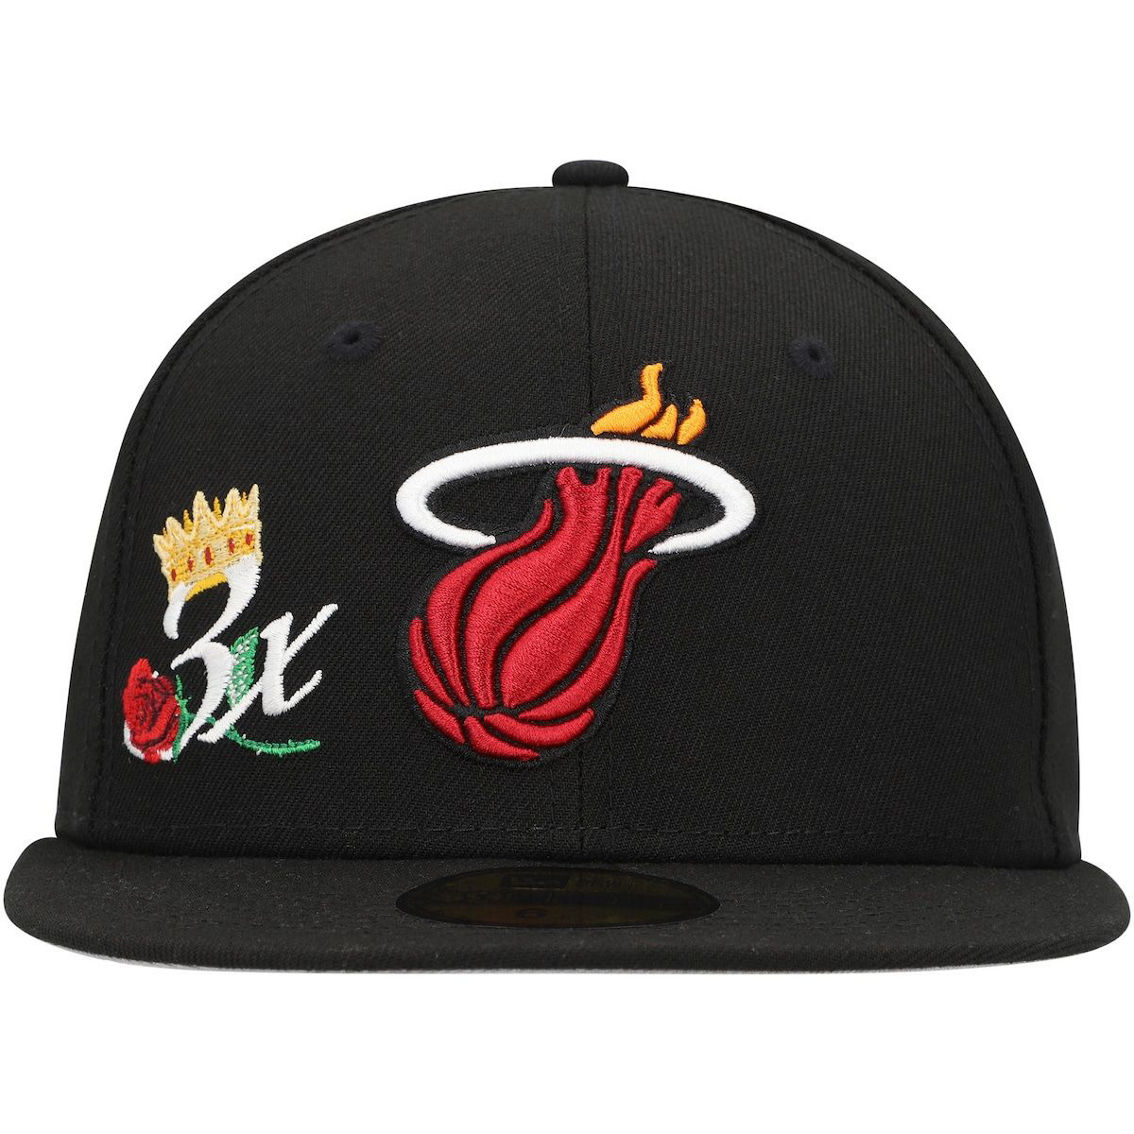 New Era Men's Black Miami Heat Crown Champs 59FIFTY Fitted Hat - Image 3 of 4